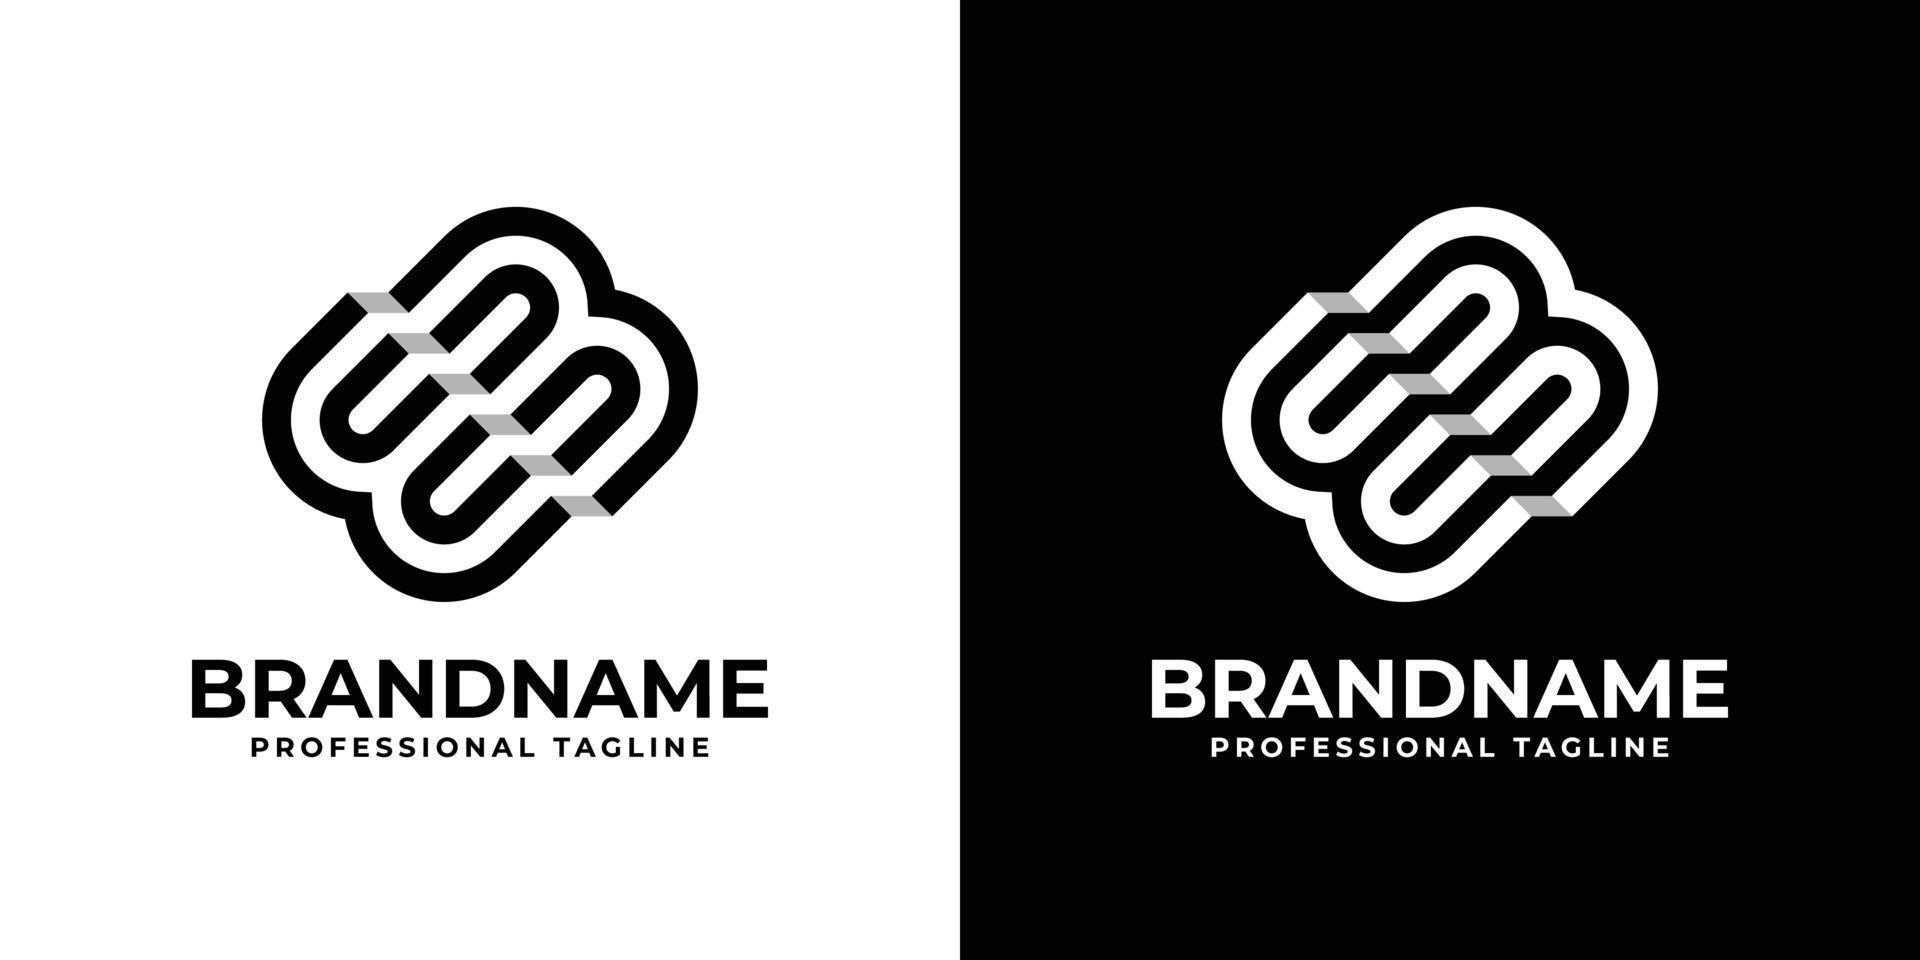 Simple EB or WM Monogram Logo, suitable for any business with EB or WM initials. vector